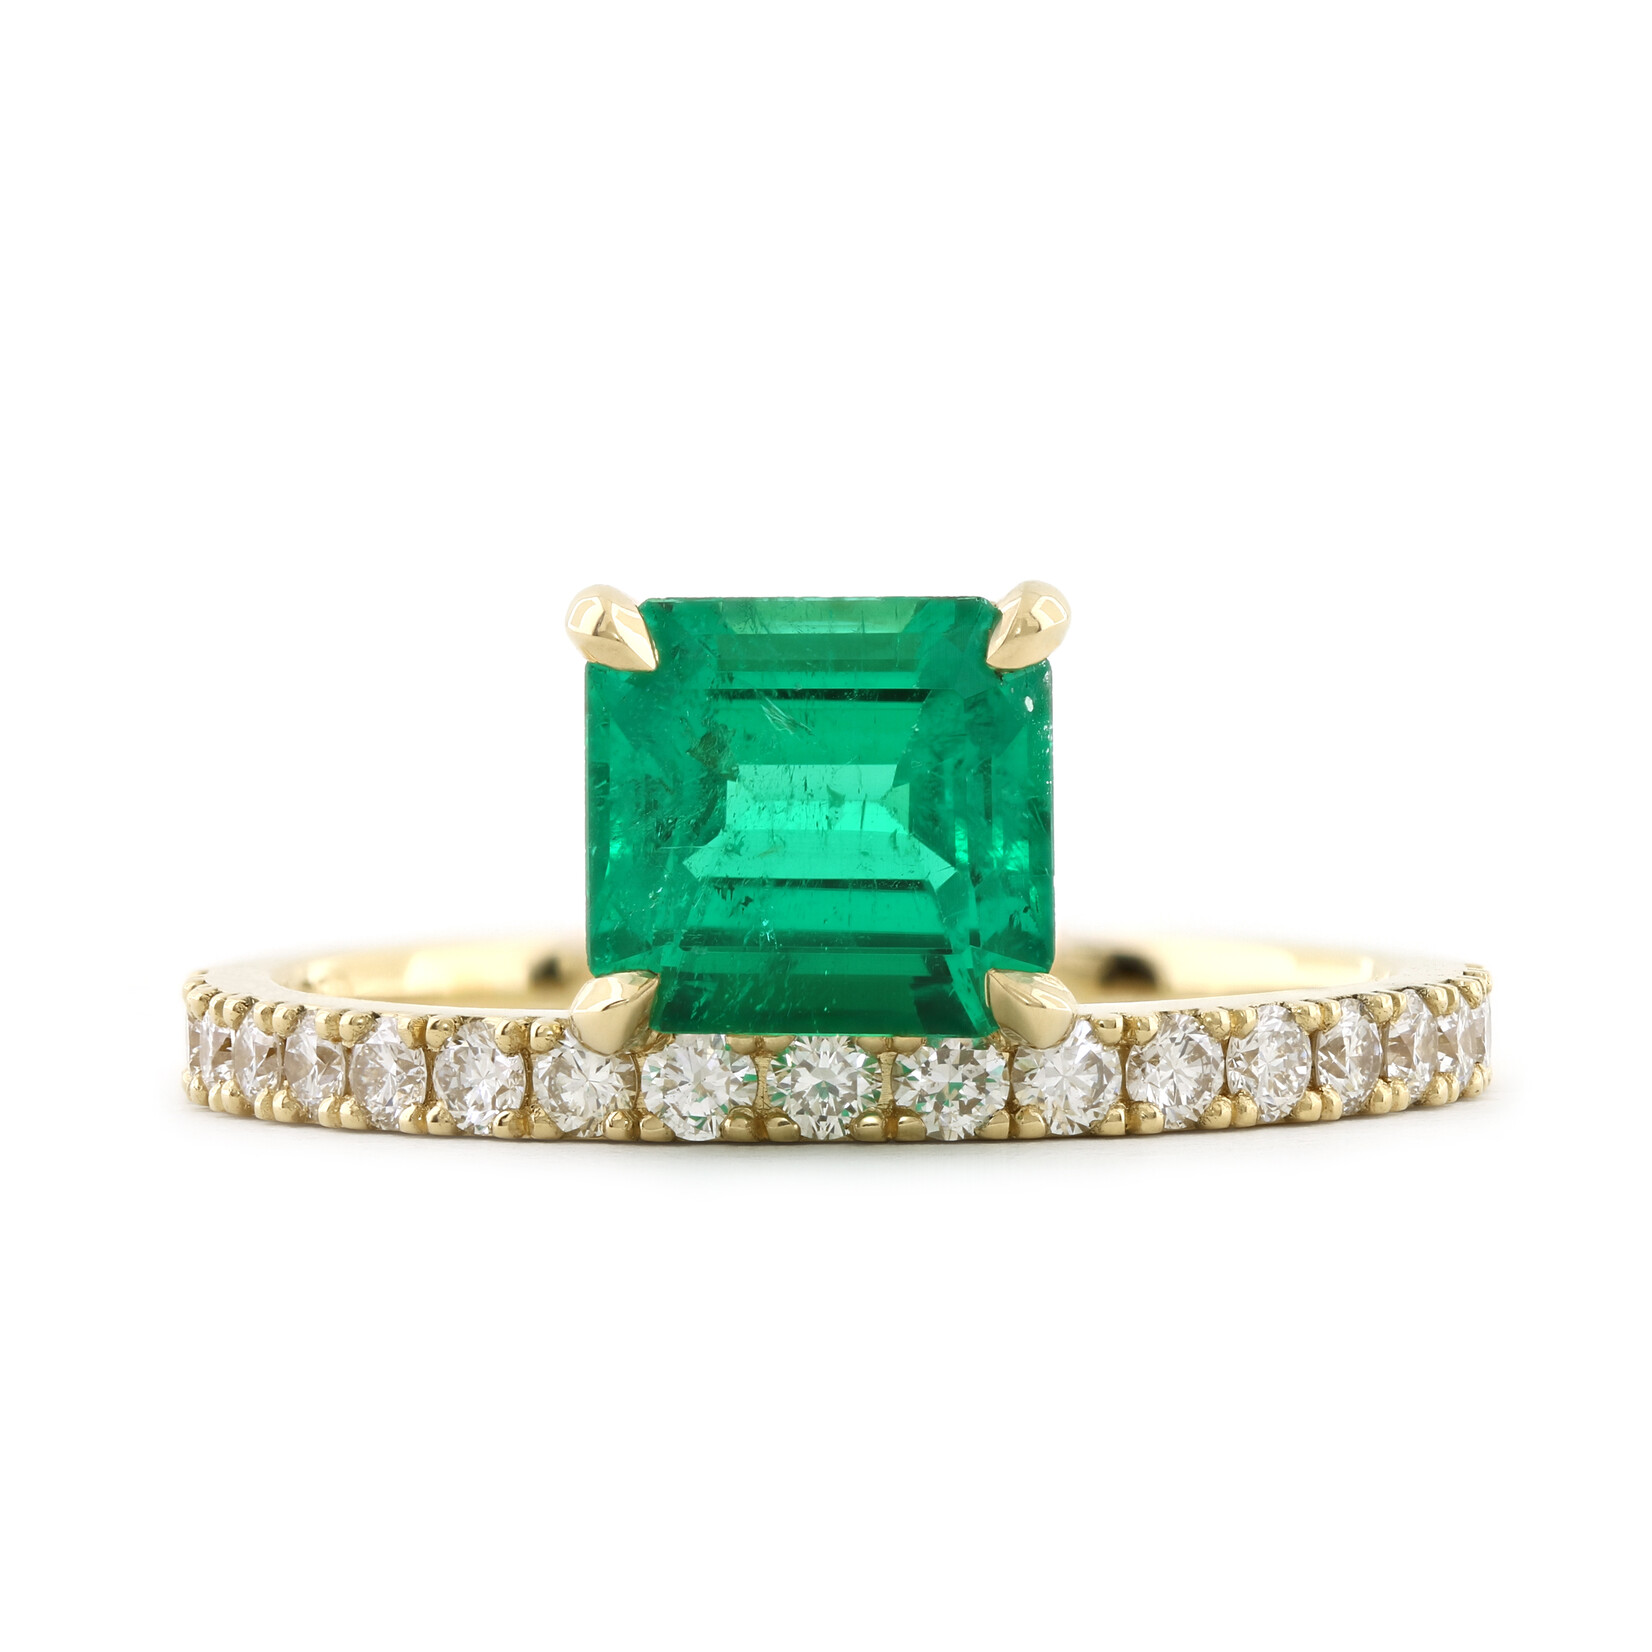 Baxter Moerman Cendra Ring with 1.32ct Emerald